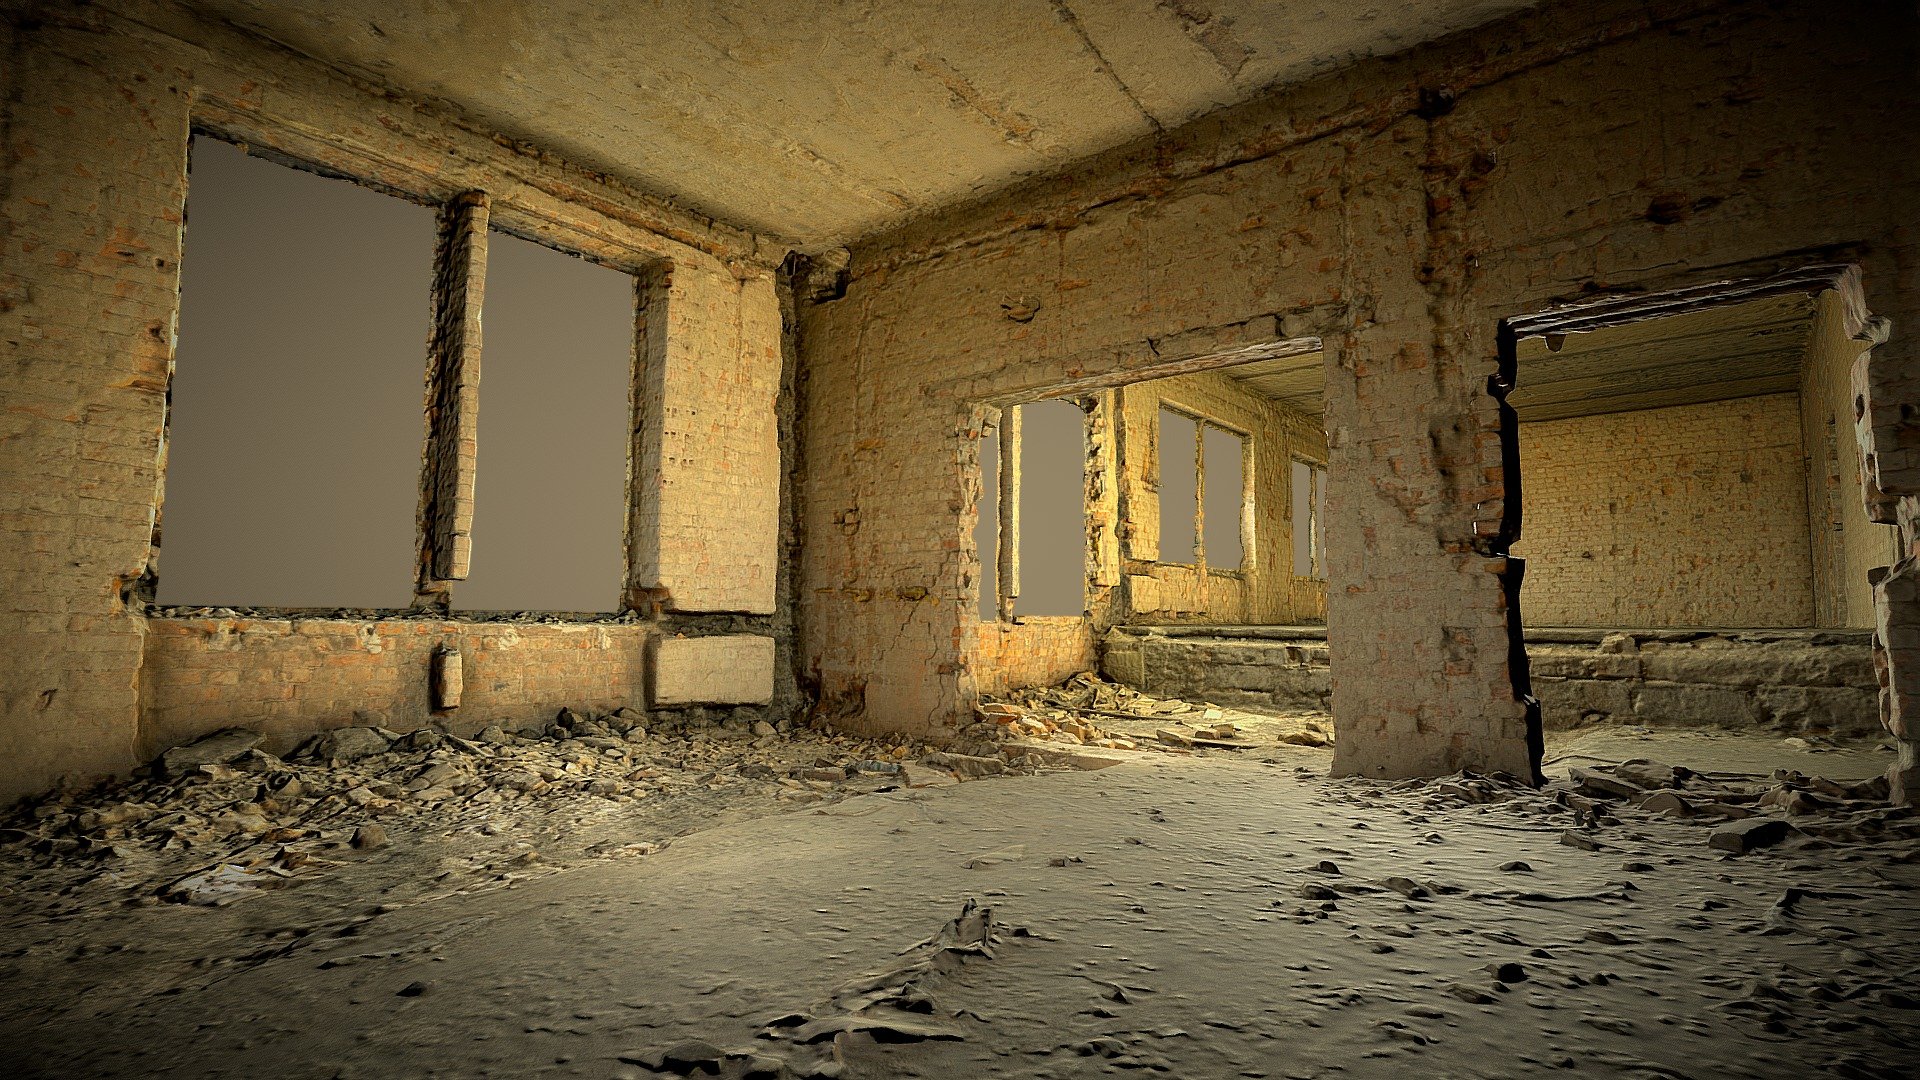 Room with two levels under renovation

Model 3D created in RC from 768 images (sony a6000)

Download version:

FBX Triangles: 200 K Textures: 6x8192x8192u1v1 jpg + normal

FBX Triangles: 1 mln Textures: 6x8192x8192u1v1 jpg + normal

FBX Triangles: 10 mln Textures: 8x8192x8192u1v1 jpg + normal

All normal maps generated from 3D model with 40 mln triangles.

If you need re-exporting or are interested in source images, please email me.

If you like my work leave a like or comment and follow me for more! Thanks :)

















 - Room with two levels under renovation - Buy Royalty Free 3D model by archiwum_xyz 3d model